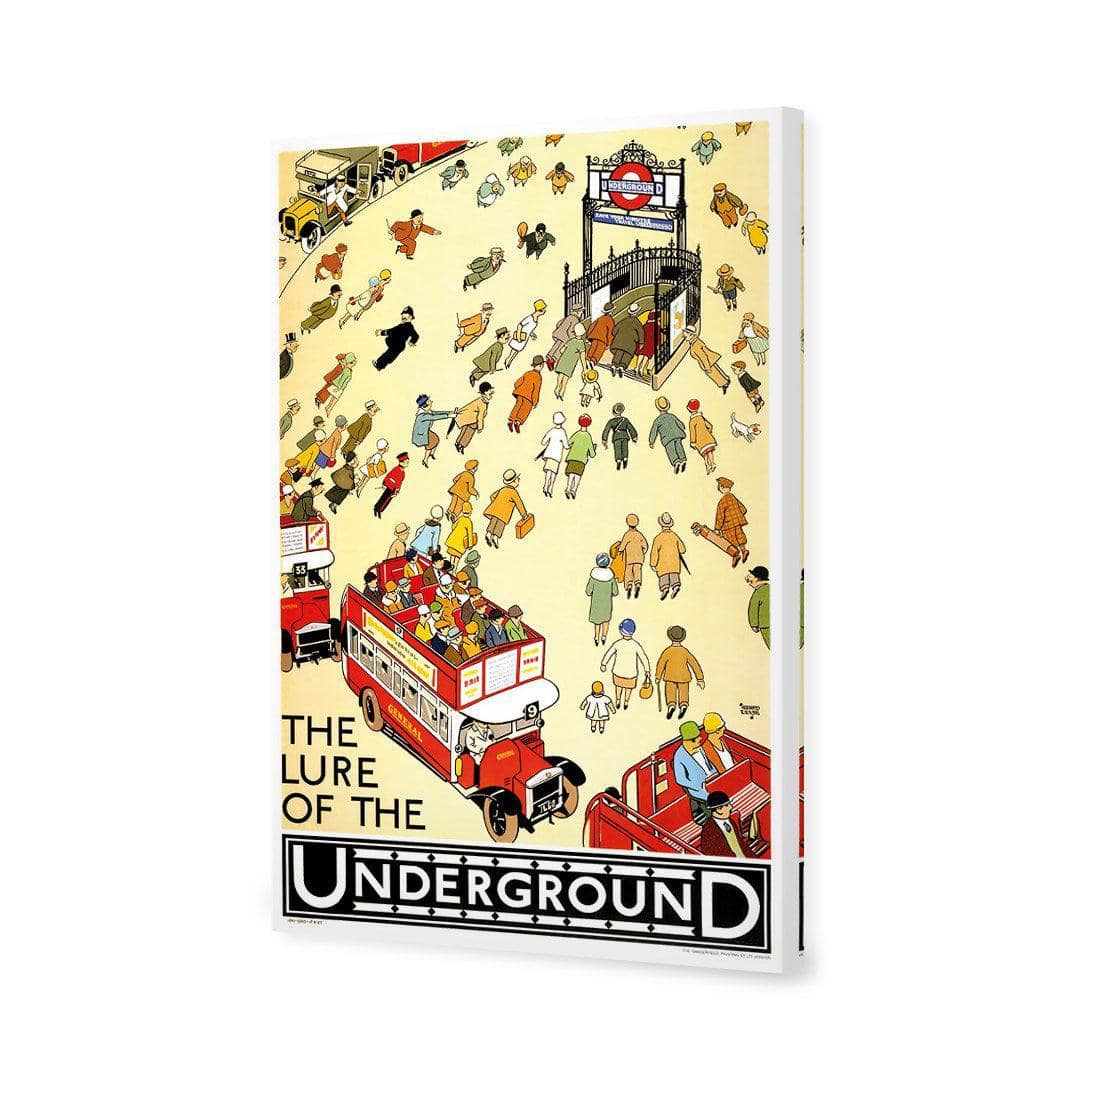 The Lure Of The Underground Canvas Art-Canvas-Wall Art Designs-45x30cm-Canvas - No Frame-Wall Art Designs